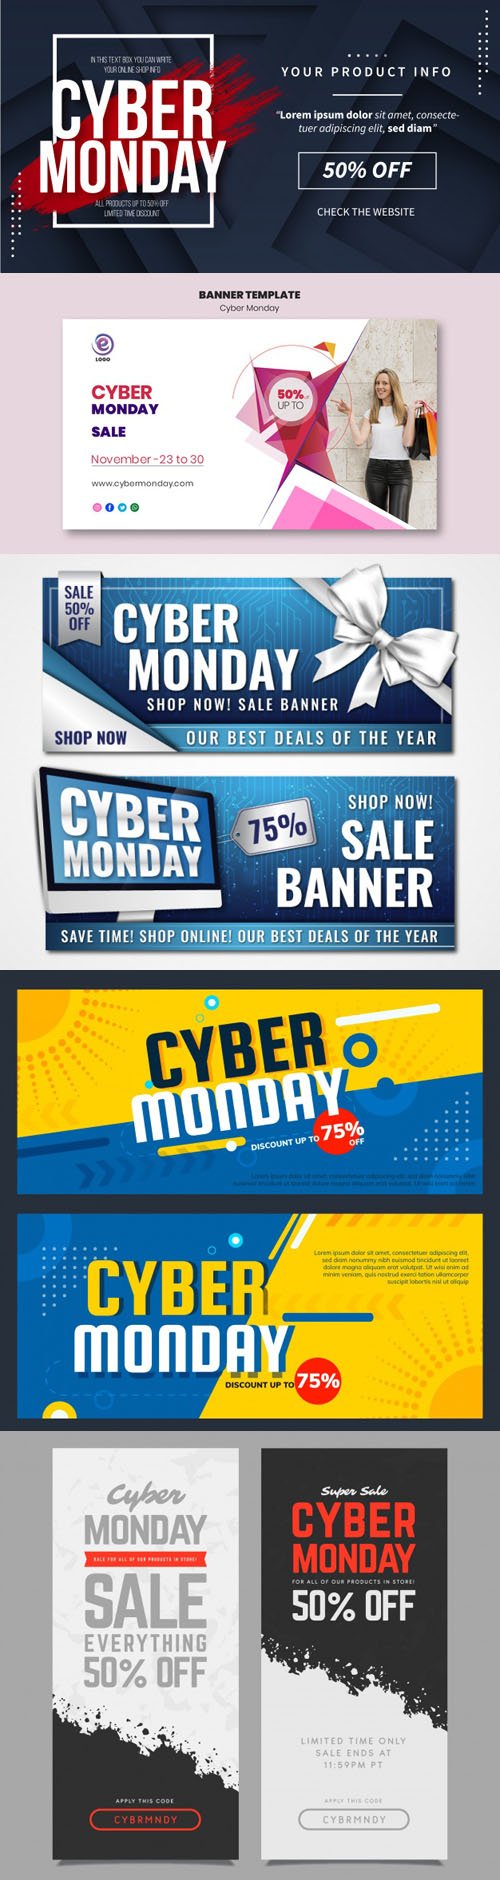 Cyber Monday 2019 Banners Vector Colletion Vol.2